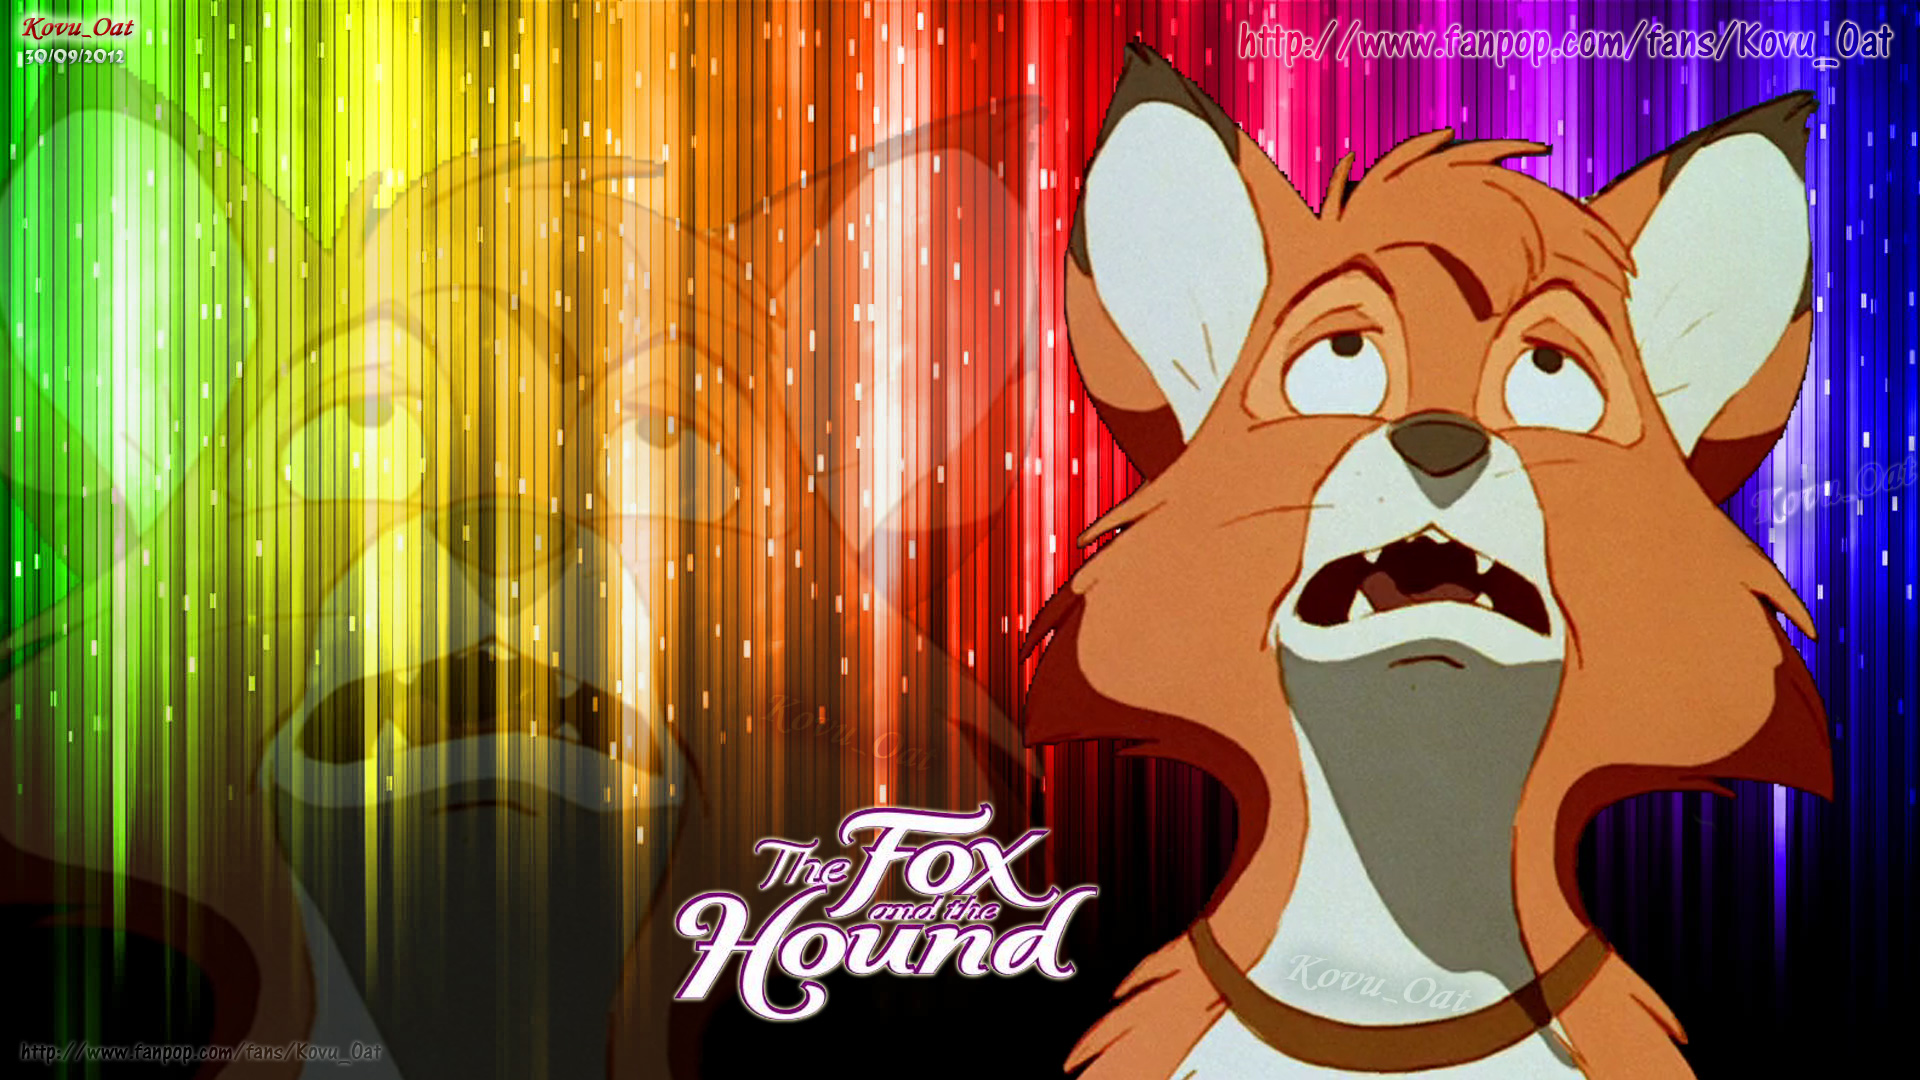 Adult Tod From The Fox And Hound Wallpaper HD